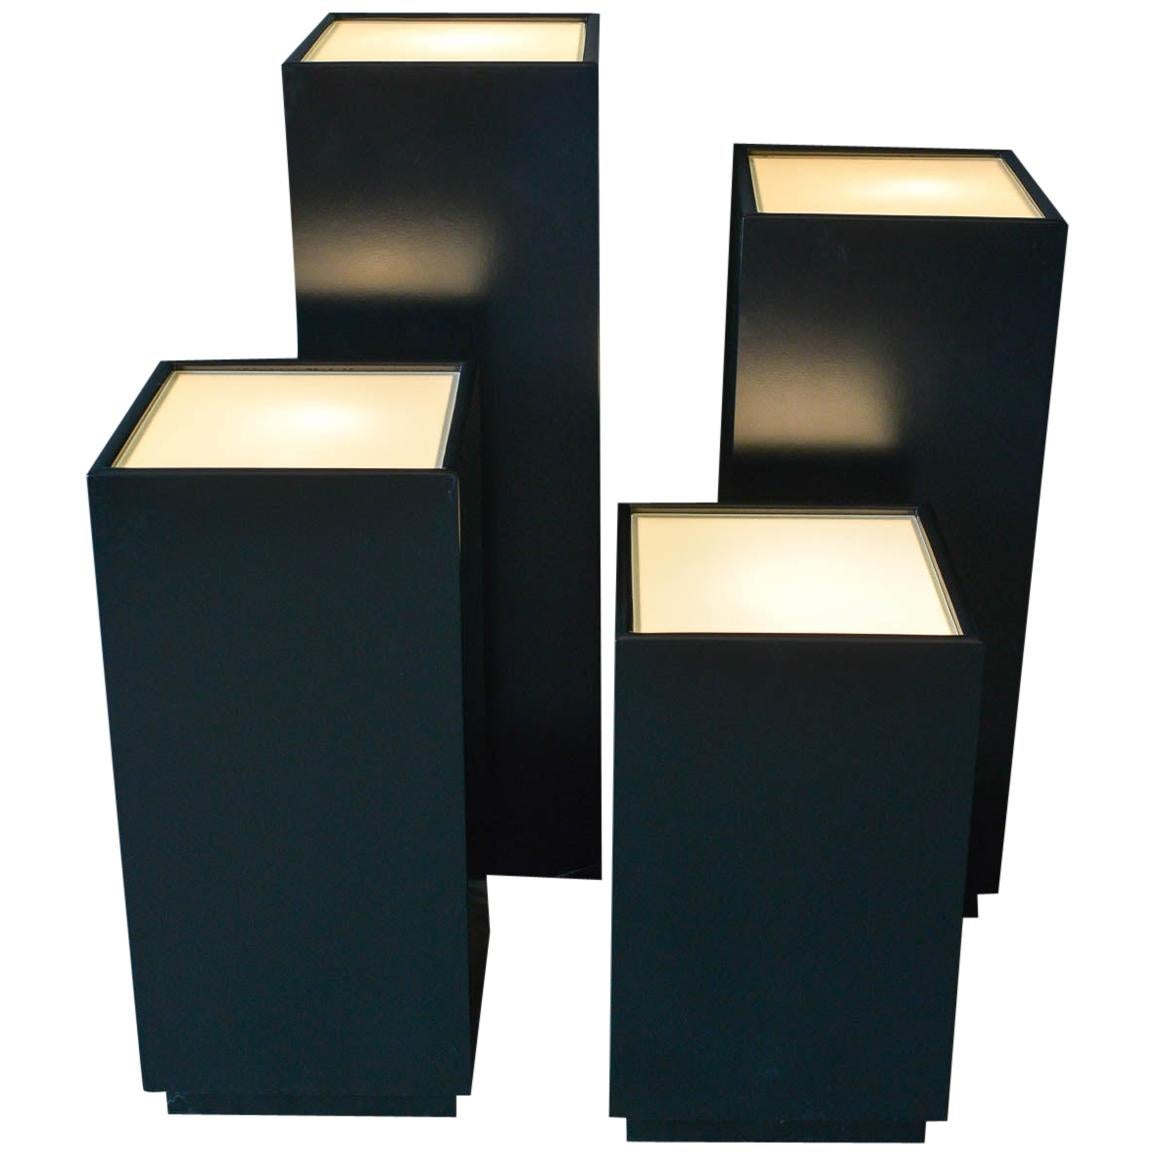 Set of Vintage Illuminated Display Pedestals by Albright and Zimmerman, ca. 1984